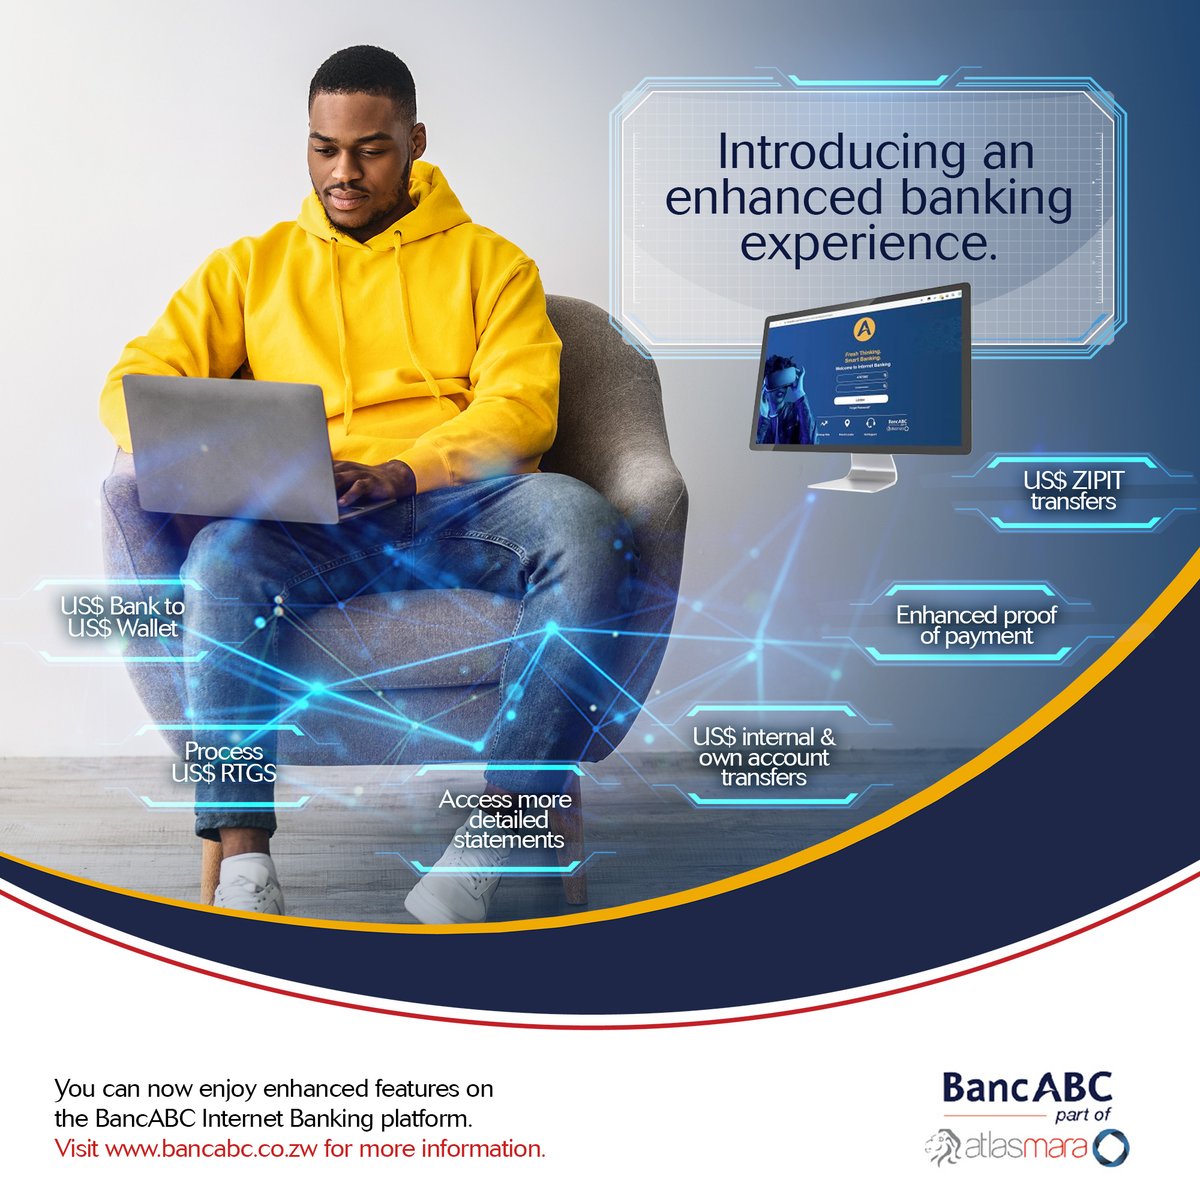 Enjoy enhanced features on the @BancabcZW Internet Banking platform:📱💻 ✅US$ RTGS transfers ✅US$ ZIPIT transfers ✅US$ Internal & Own Account transfers ✅Proof of Payments with digital stamps ✅Detailed statements. Visit bancabc.co.zw for more info. #ATeam😎